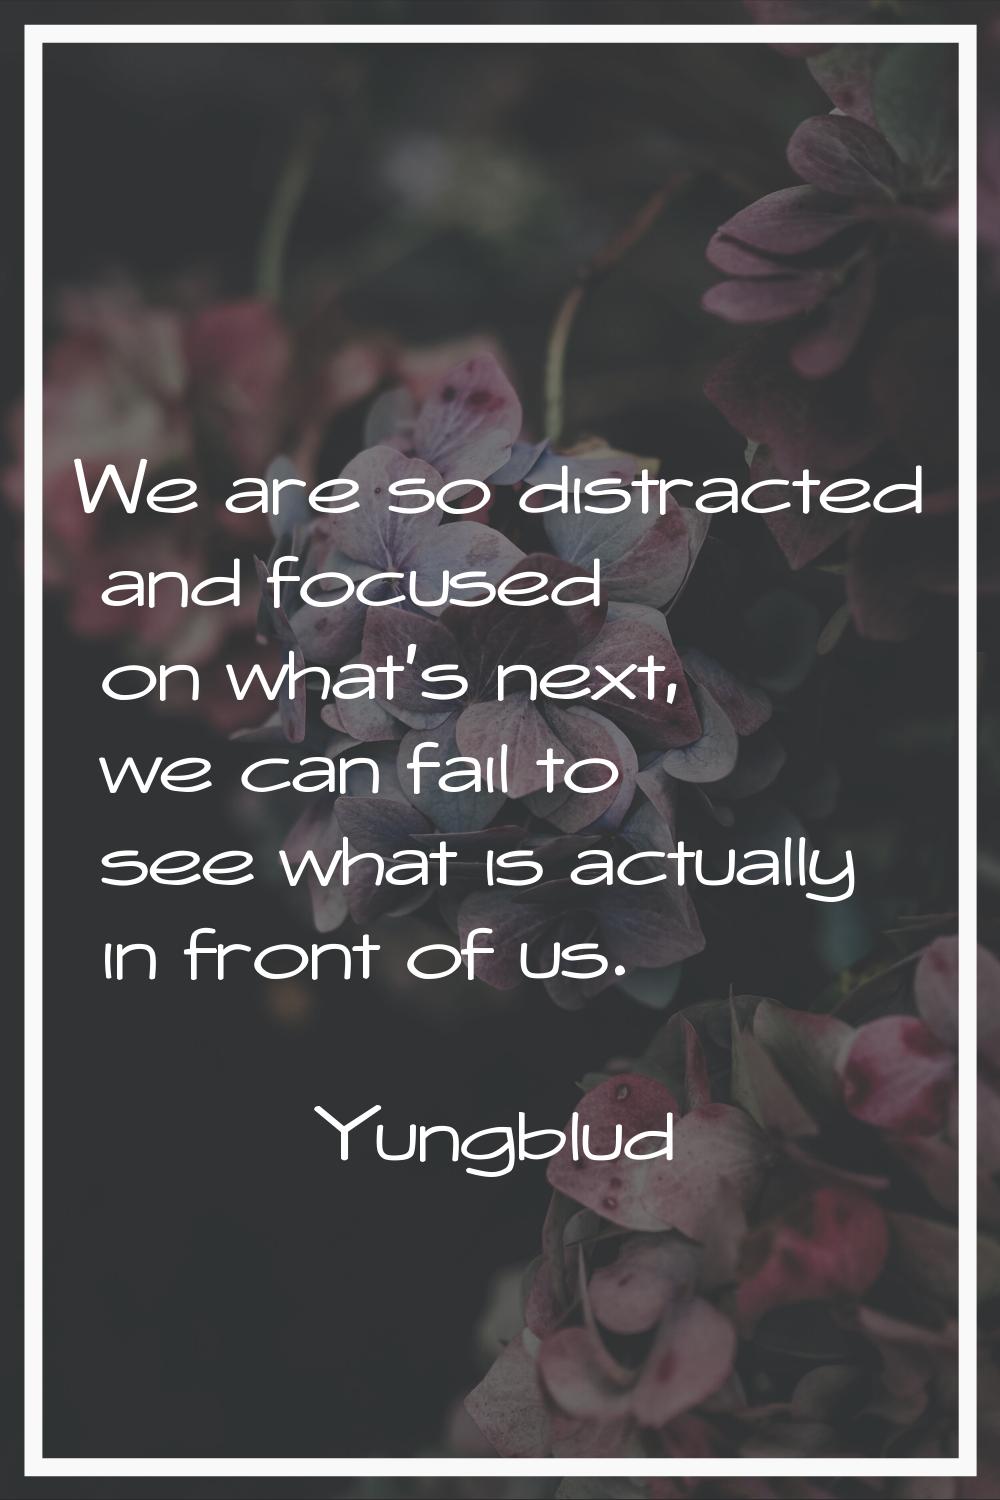 We are so distracted and focused on what's next, we can fail to see what is actually in front of us